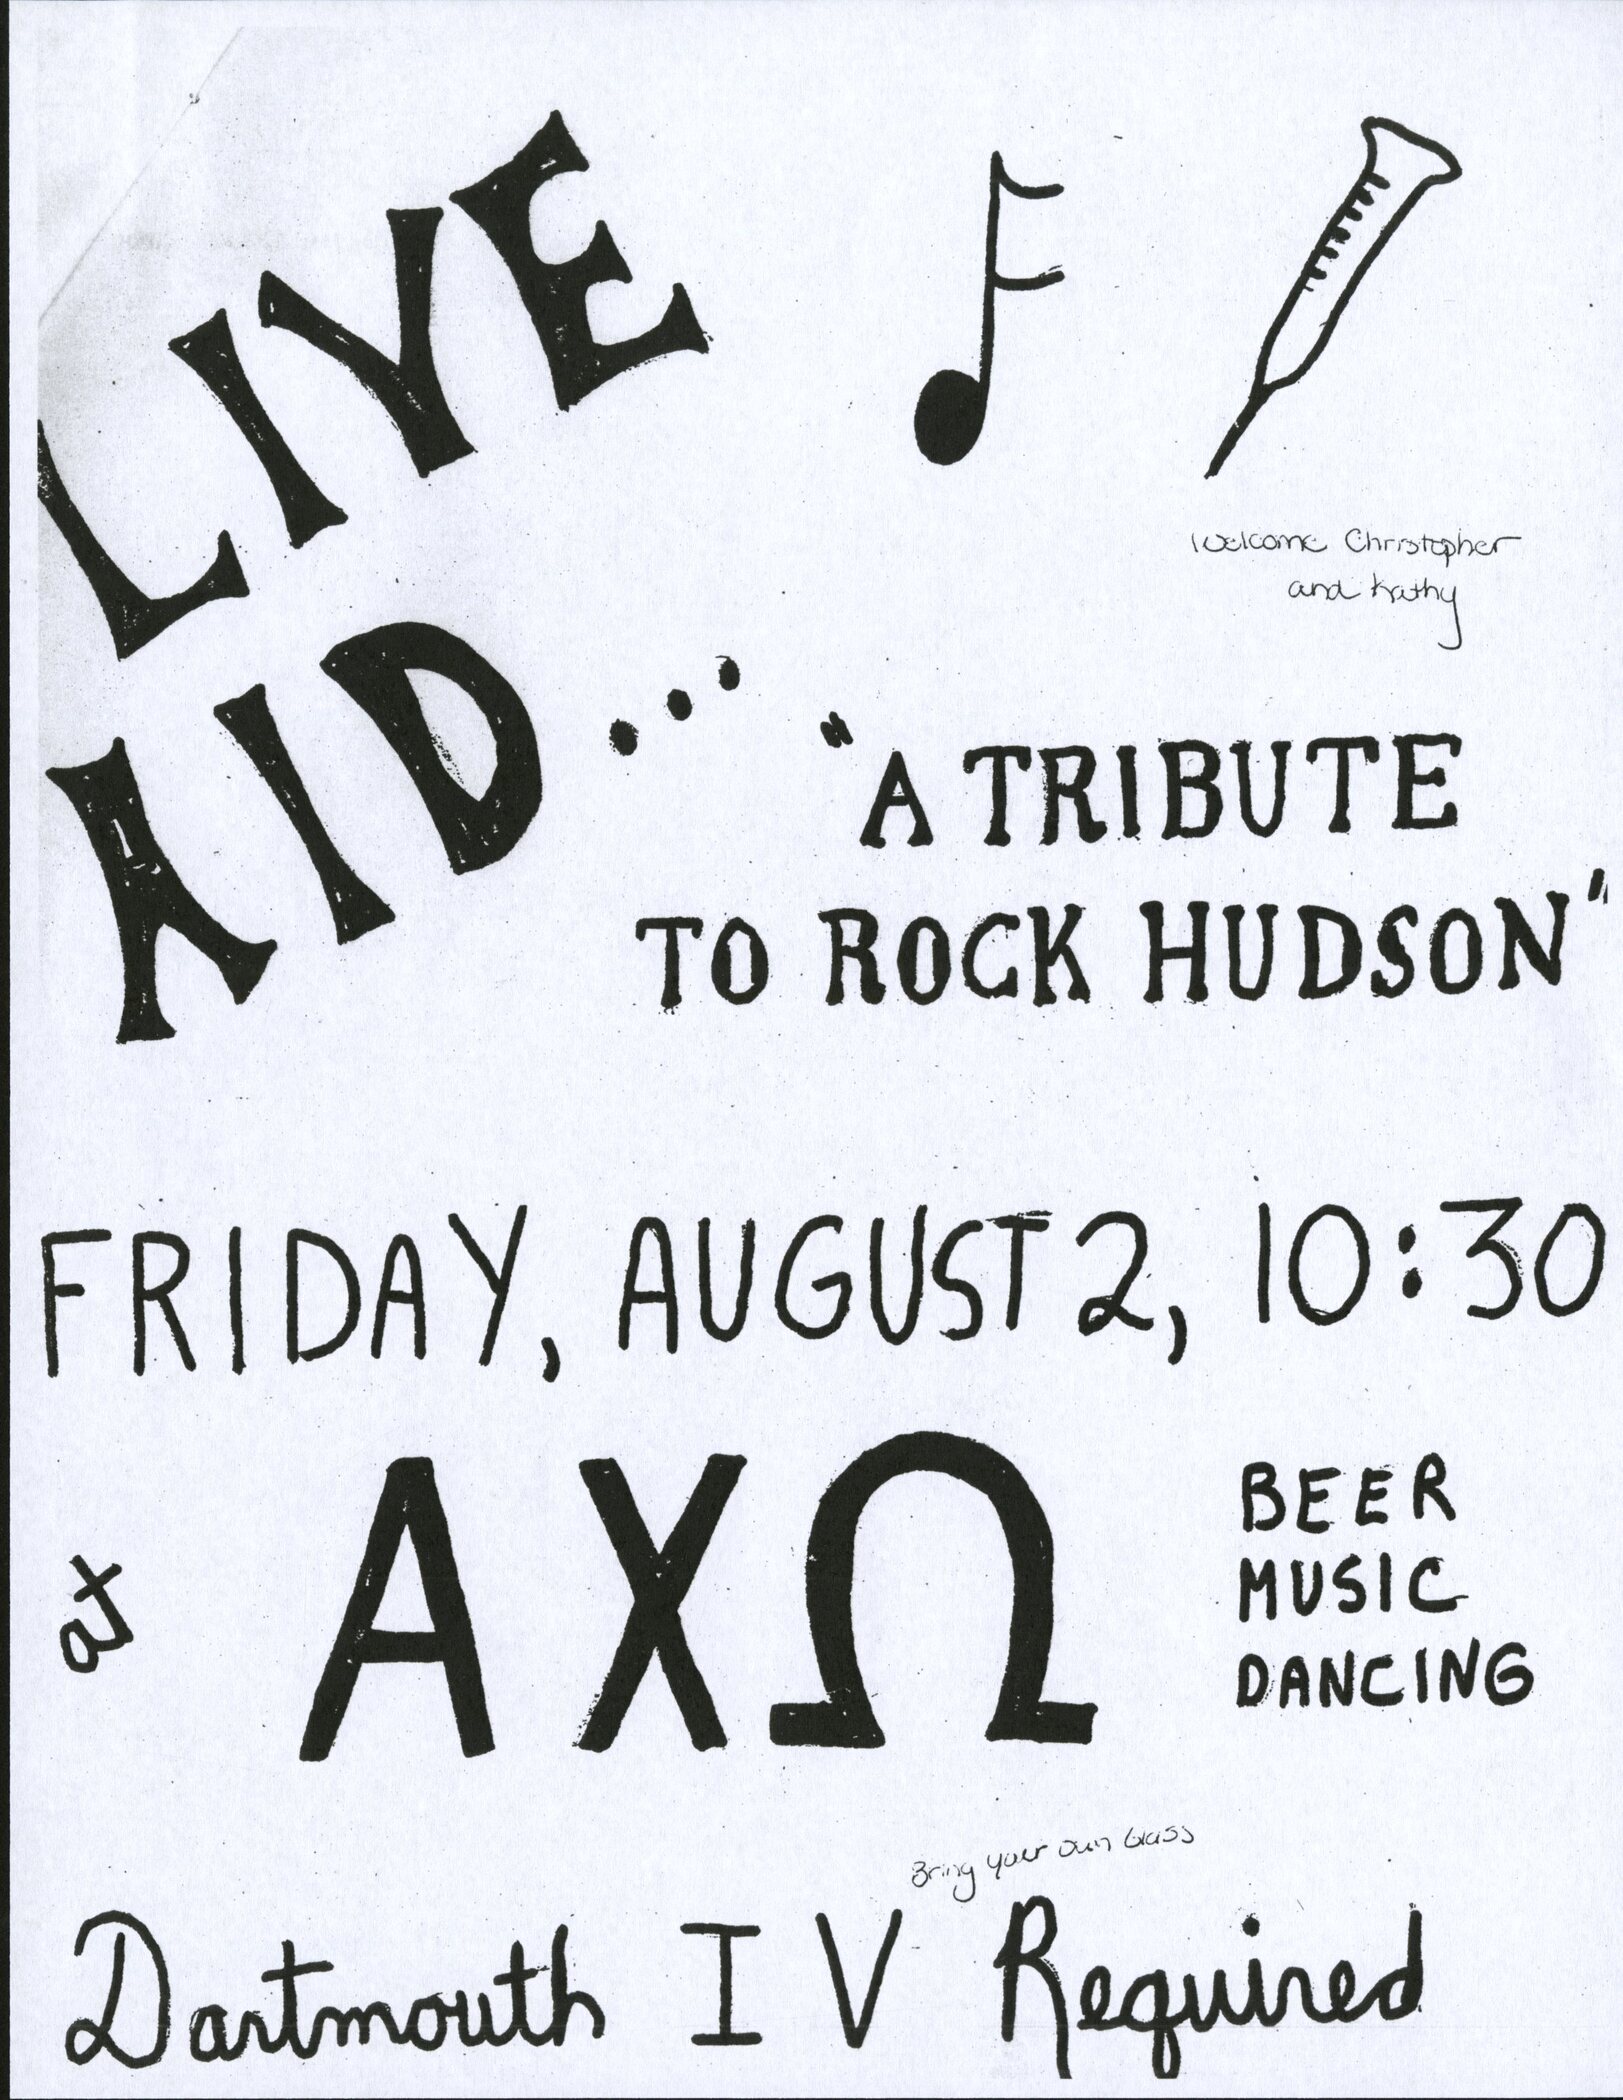 Live AID: A Tribute to Rock Hudson Party Poster